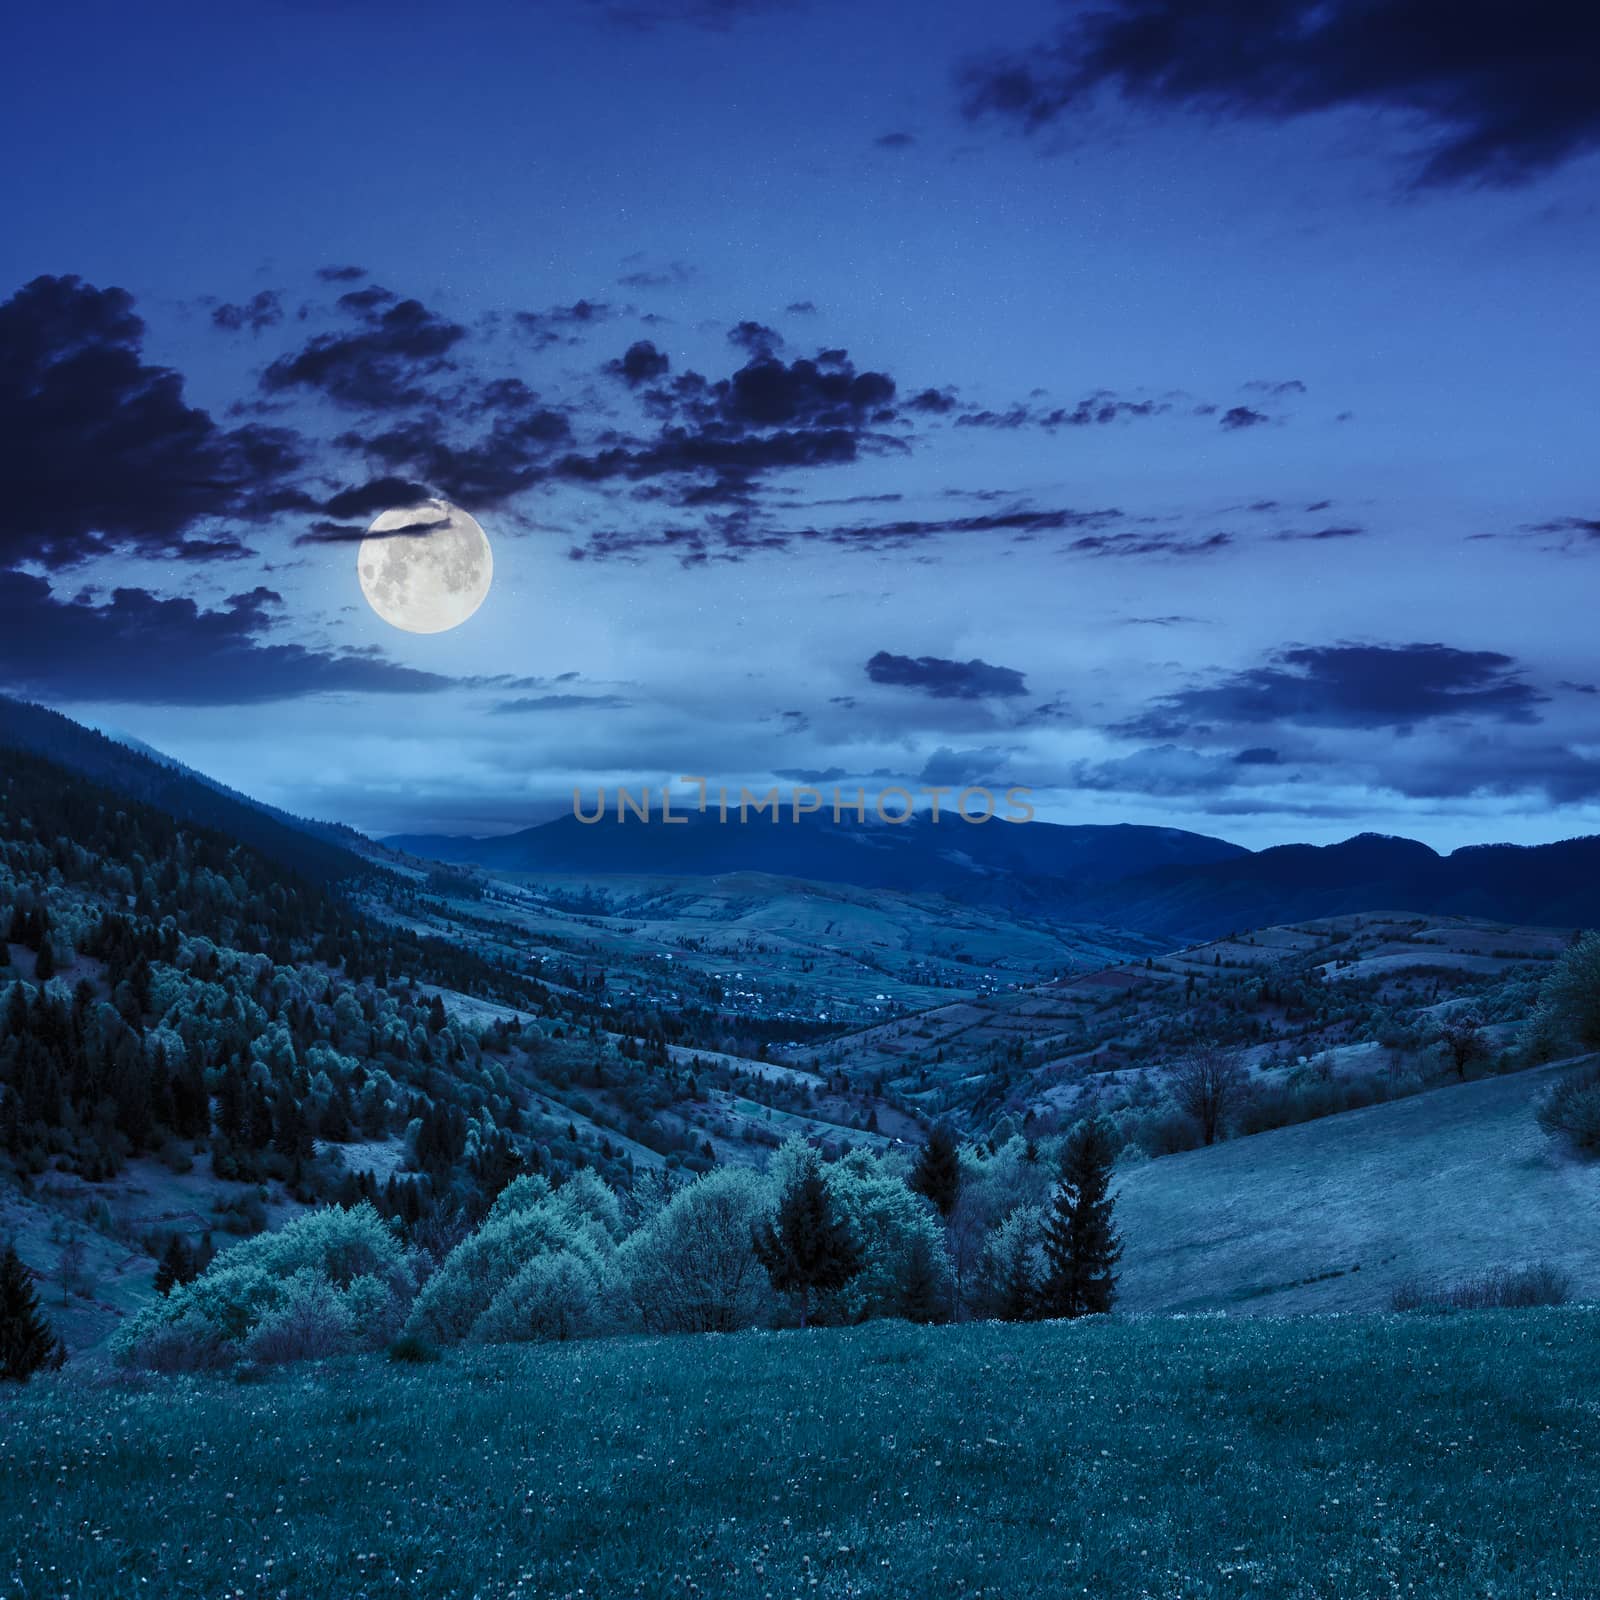 mountain summer landscape. trees near meadow and forest on hillside under  sky with clouds  at night in moon light